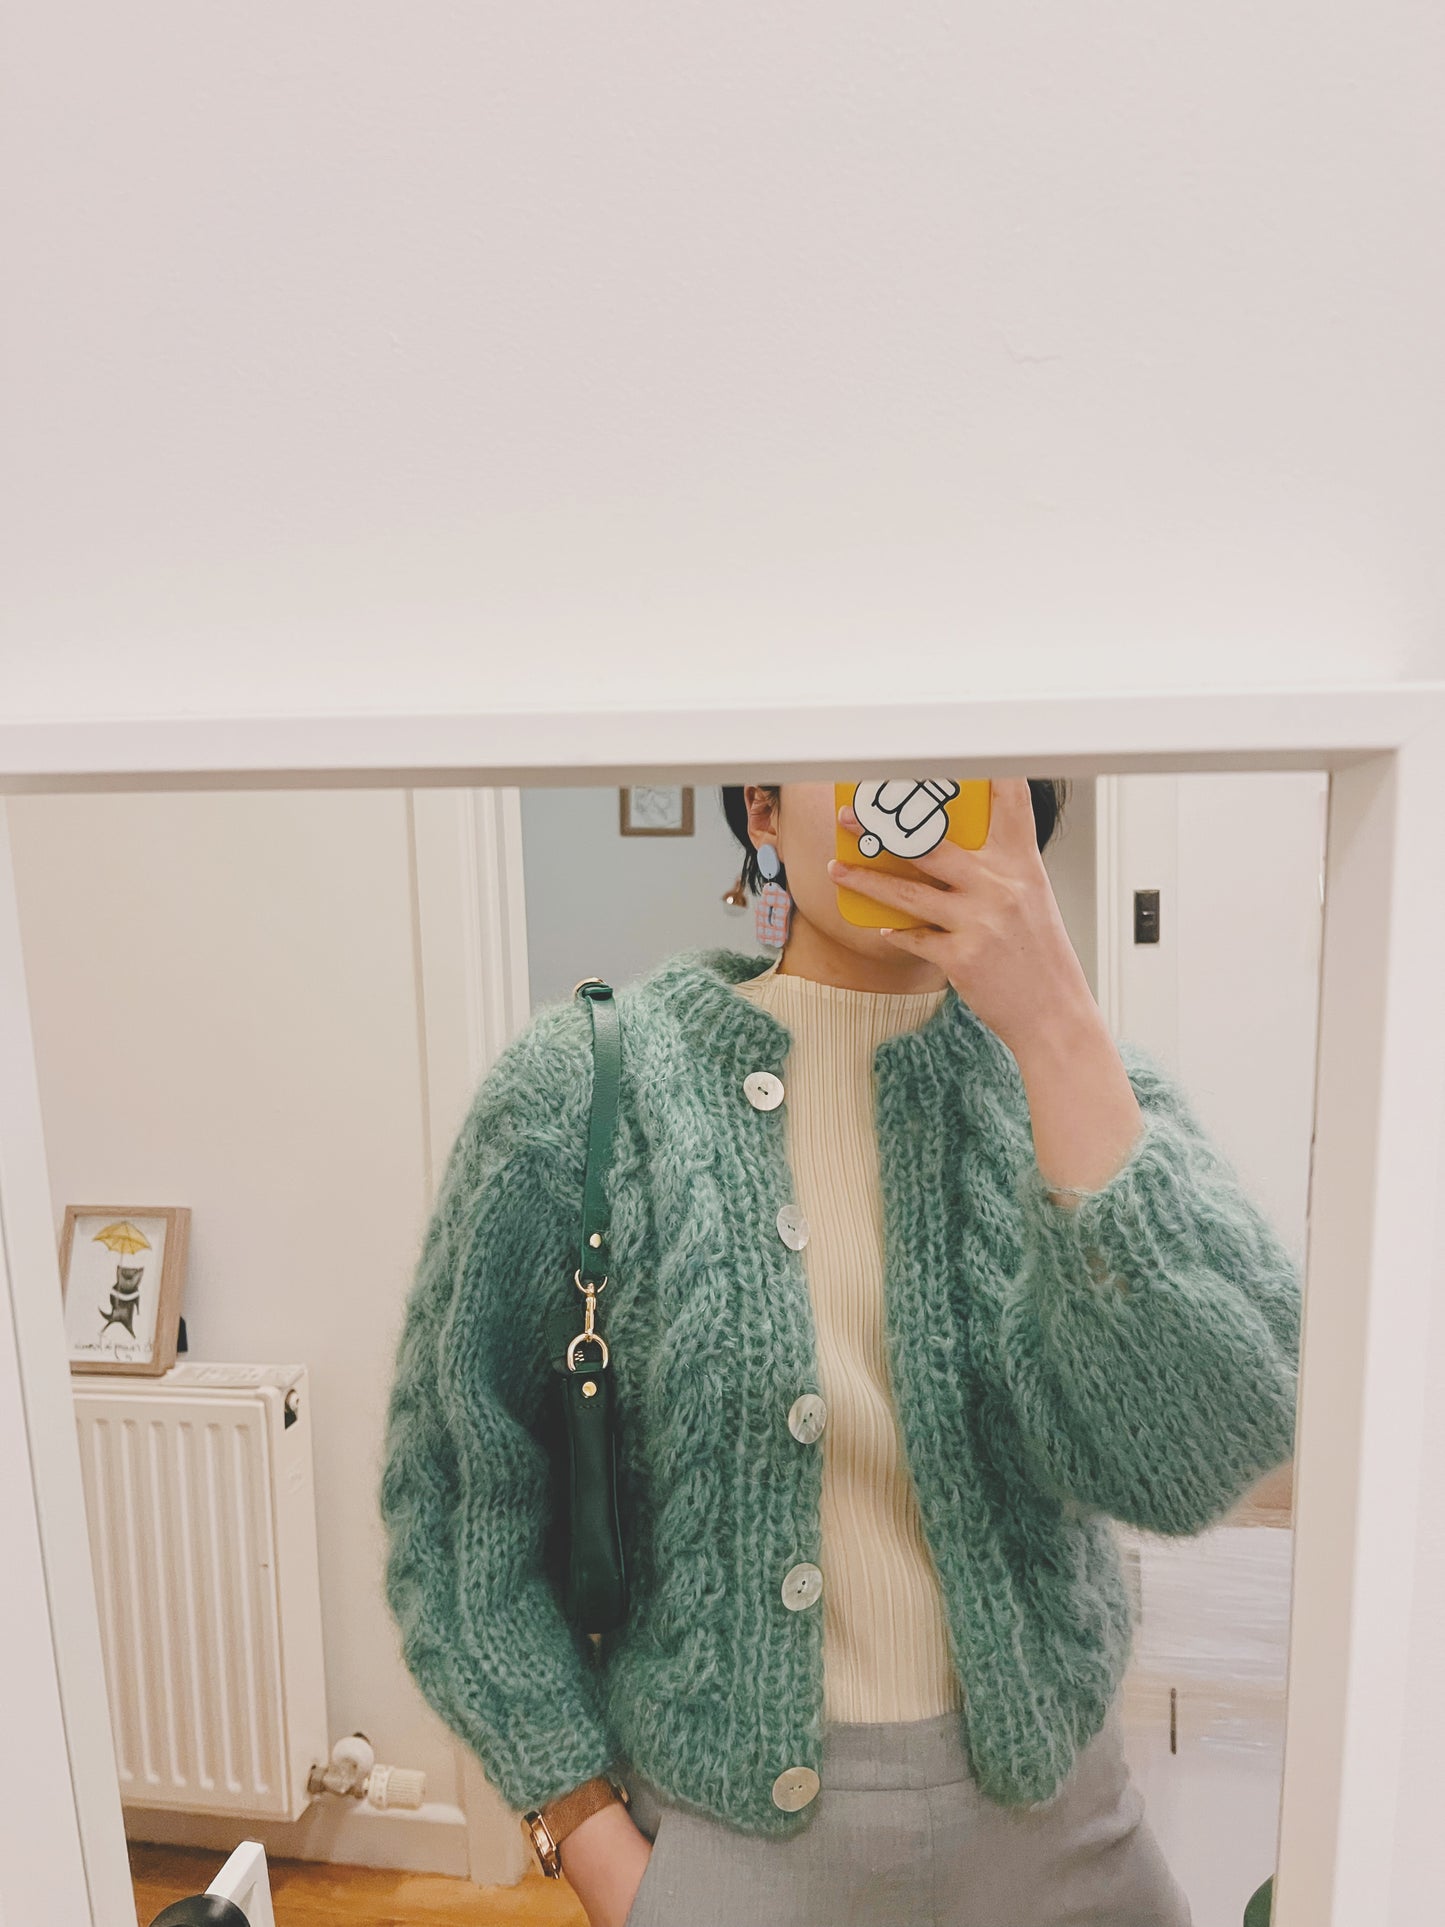 My First Cable Cardi (KNIT KIT)